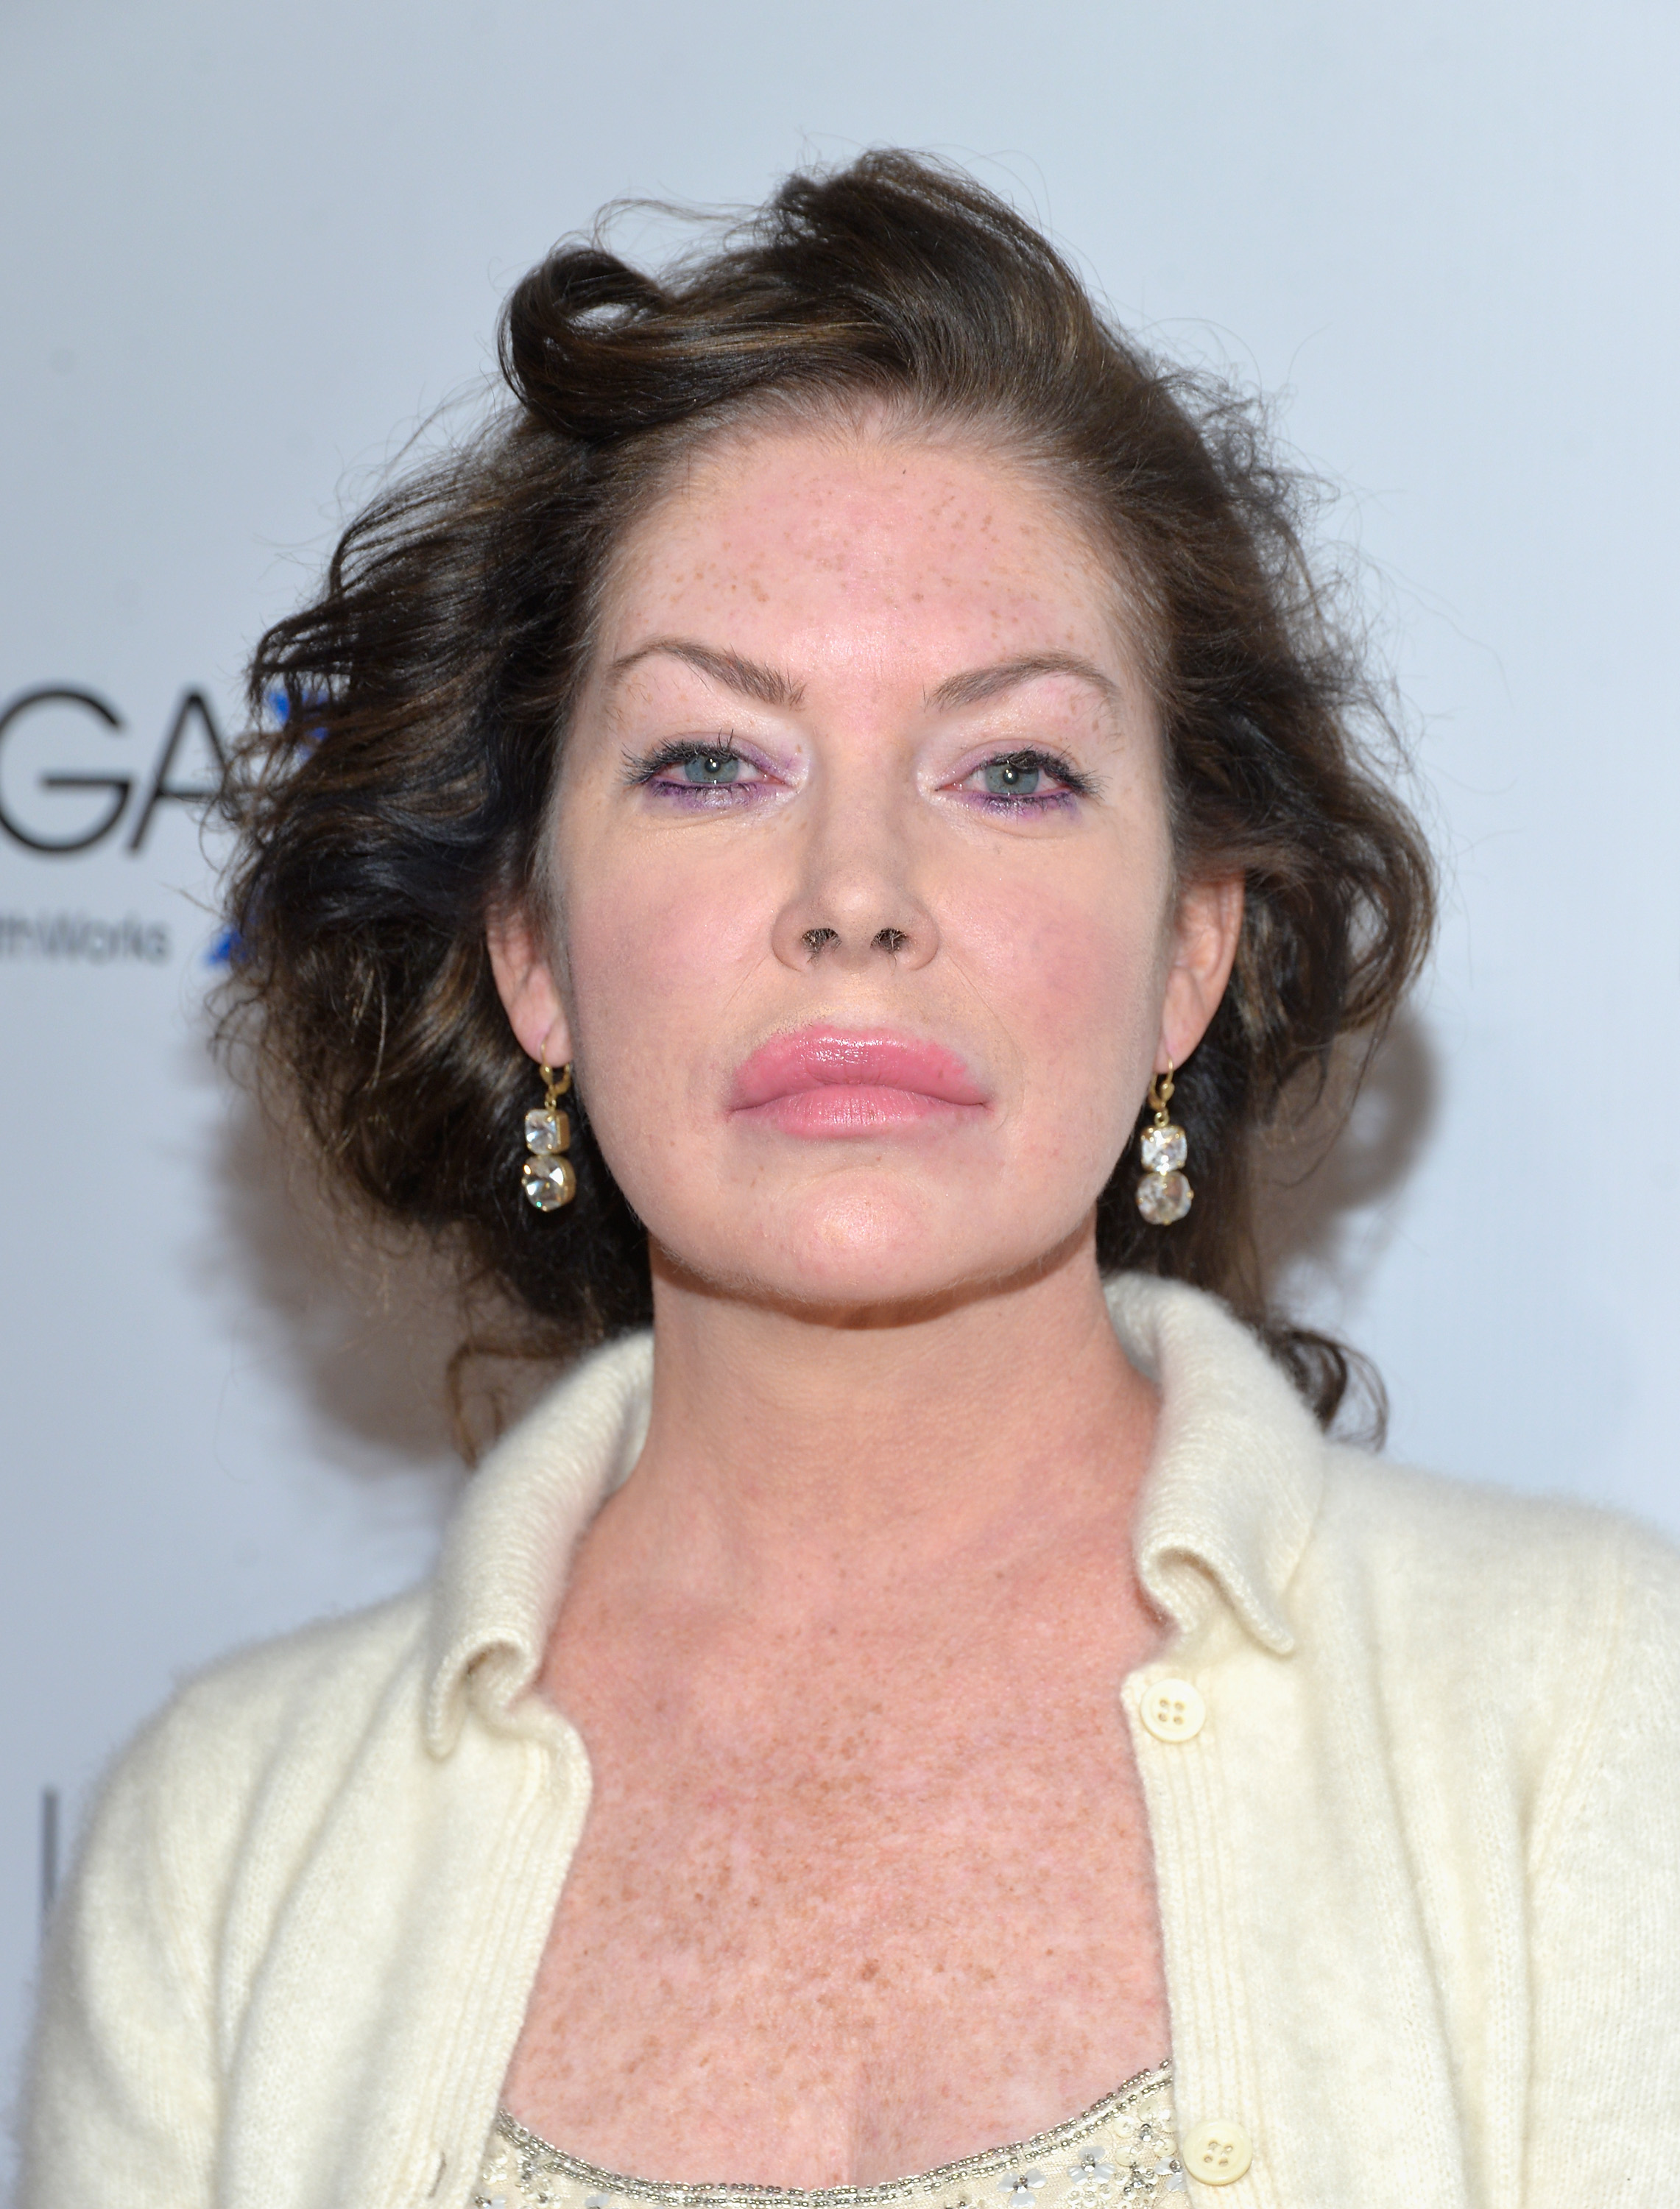 Lara Flynn Boyle attends AMT's 2017 D.R.E.A.M. Gala in November 2017 | Source: Getty Images